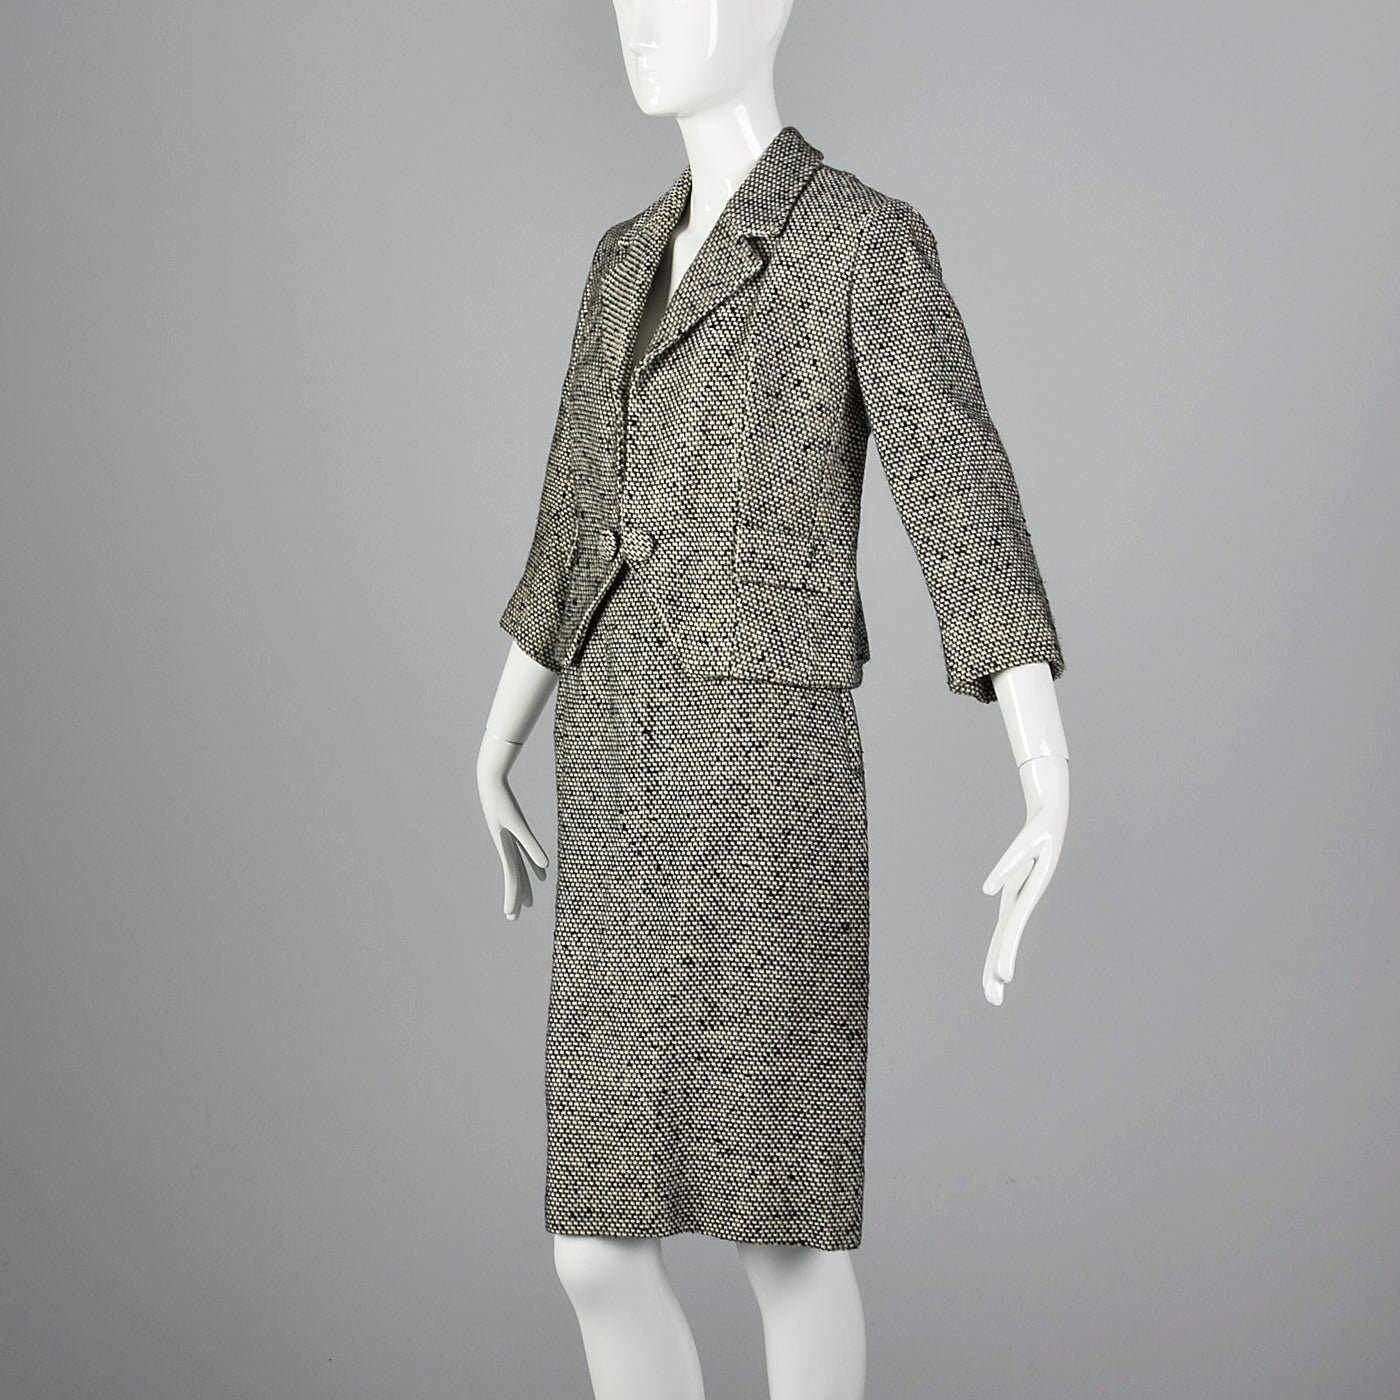 1960s Black and White Tweed Skirt Suit